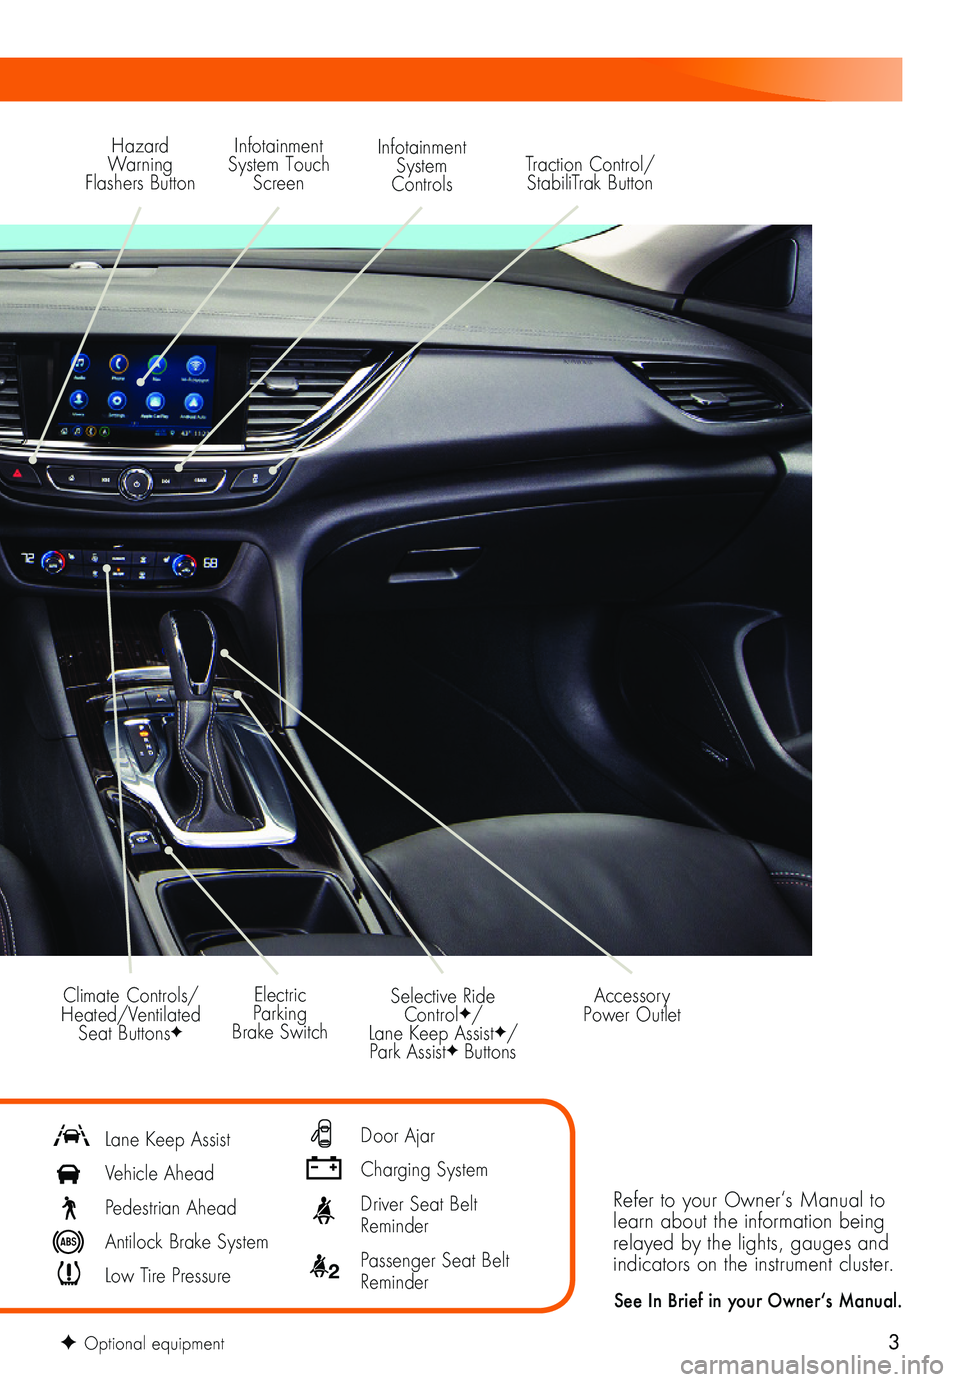 BUICK REGAL SPORTBACK 2019  Get To Know Guide 3
Refer to your Owner‘s Manual to learn about the information being relayed by the lights, gauges and indicators on the instrument cluster.
See In Brief in your Owner‘s Manual.
Hazard Warning Flas